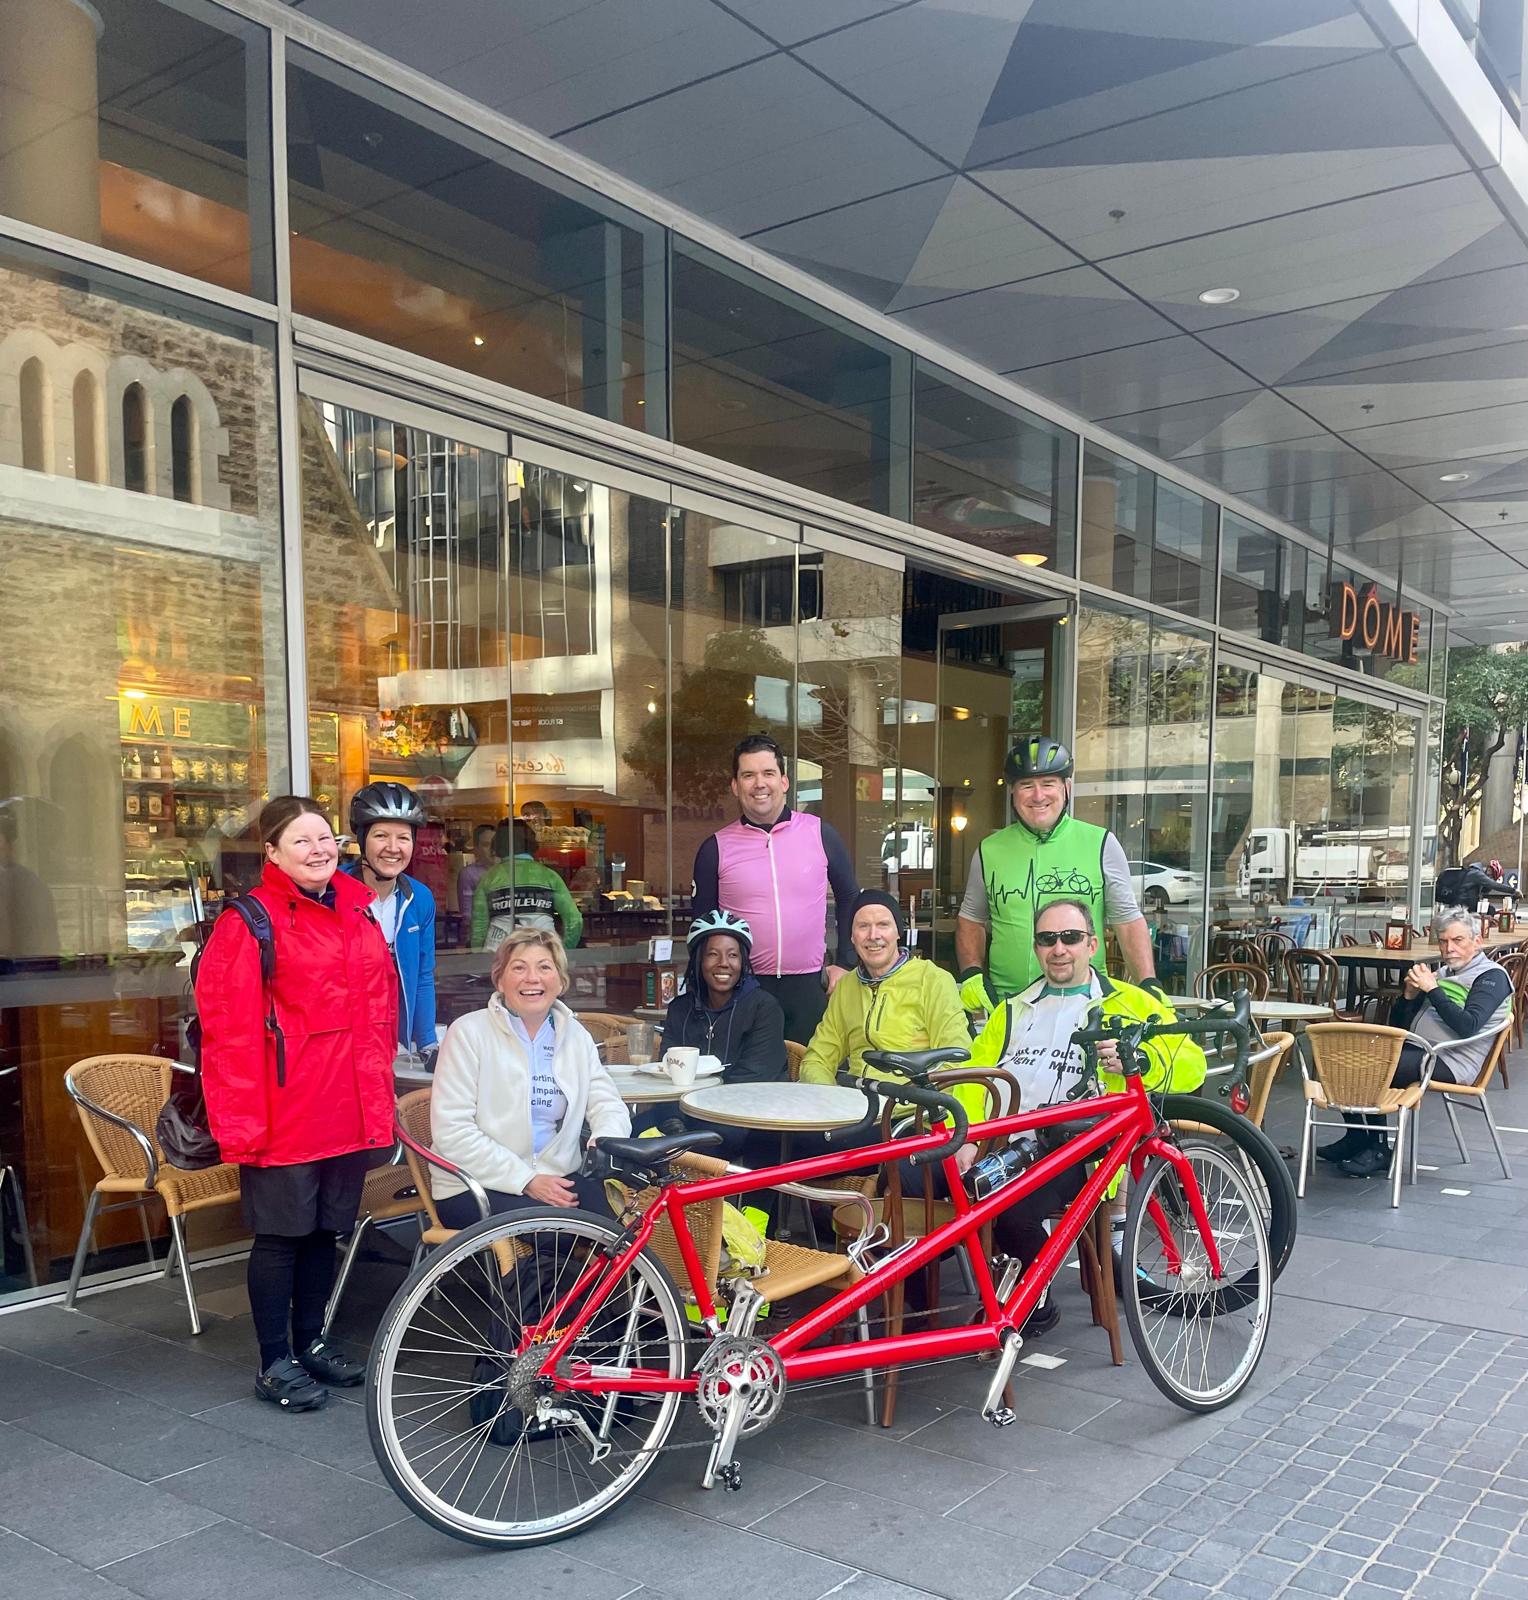 We joined the South Perth Roullers for club rides in winter and spring, the group of three tandems and two Singles shown here stopped for coffee at the SPR watering hole (Dome Cafe) in the city.